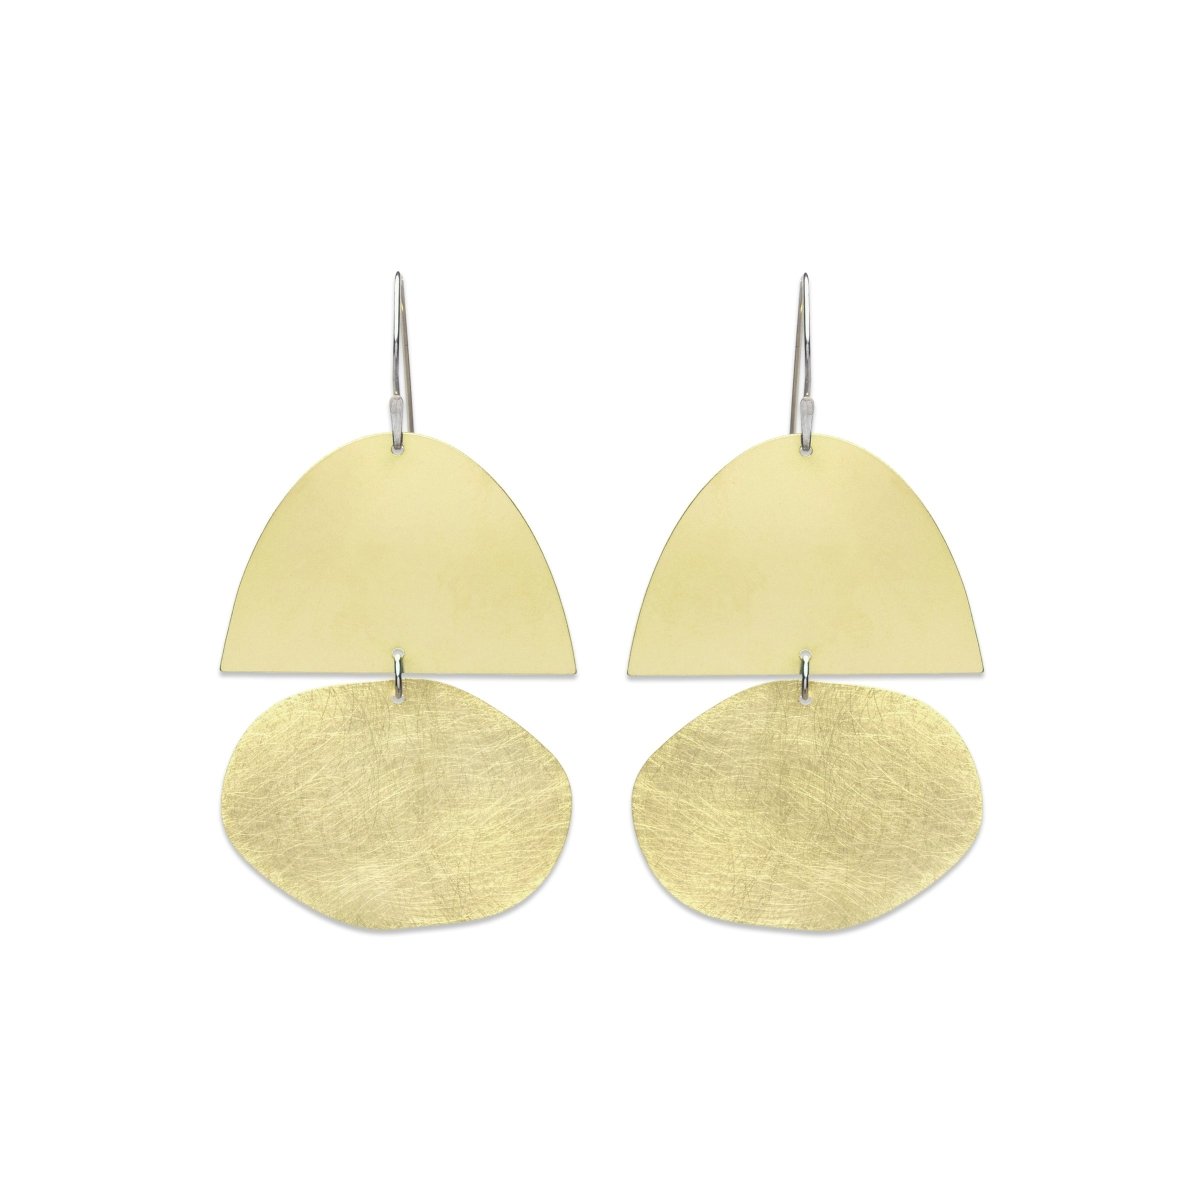 Mazi earrings in brush-finished and polished brass. Designed and handcrafted in Portland, Oregon. 